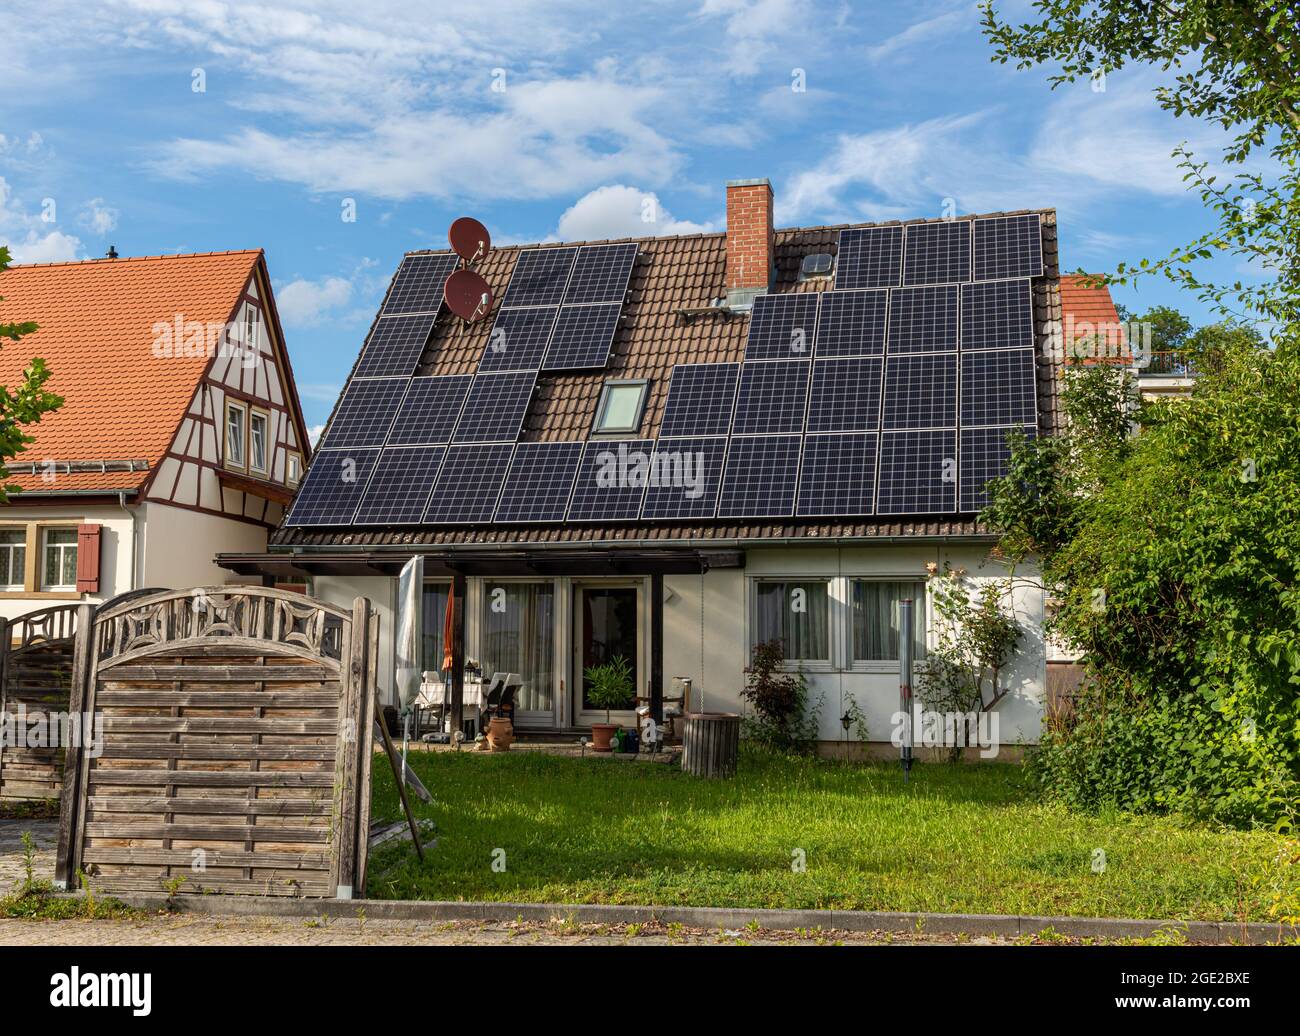 Single-family house in Germany with retrofitted photovoltaic solar system on the roof Stock Photo